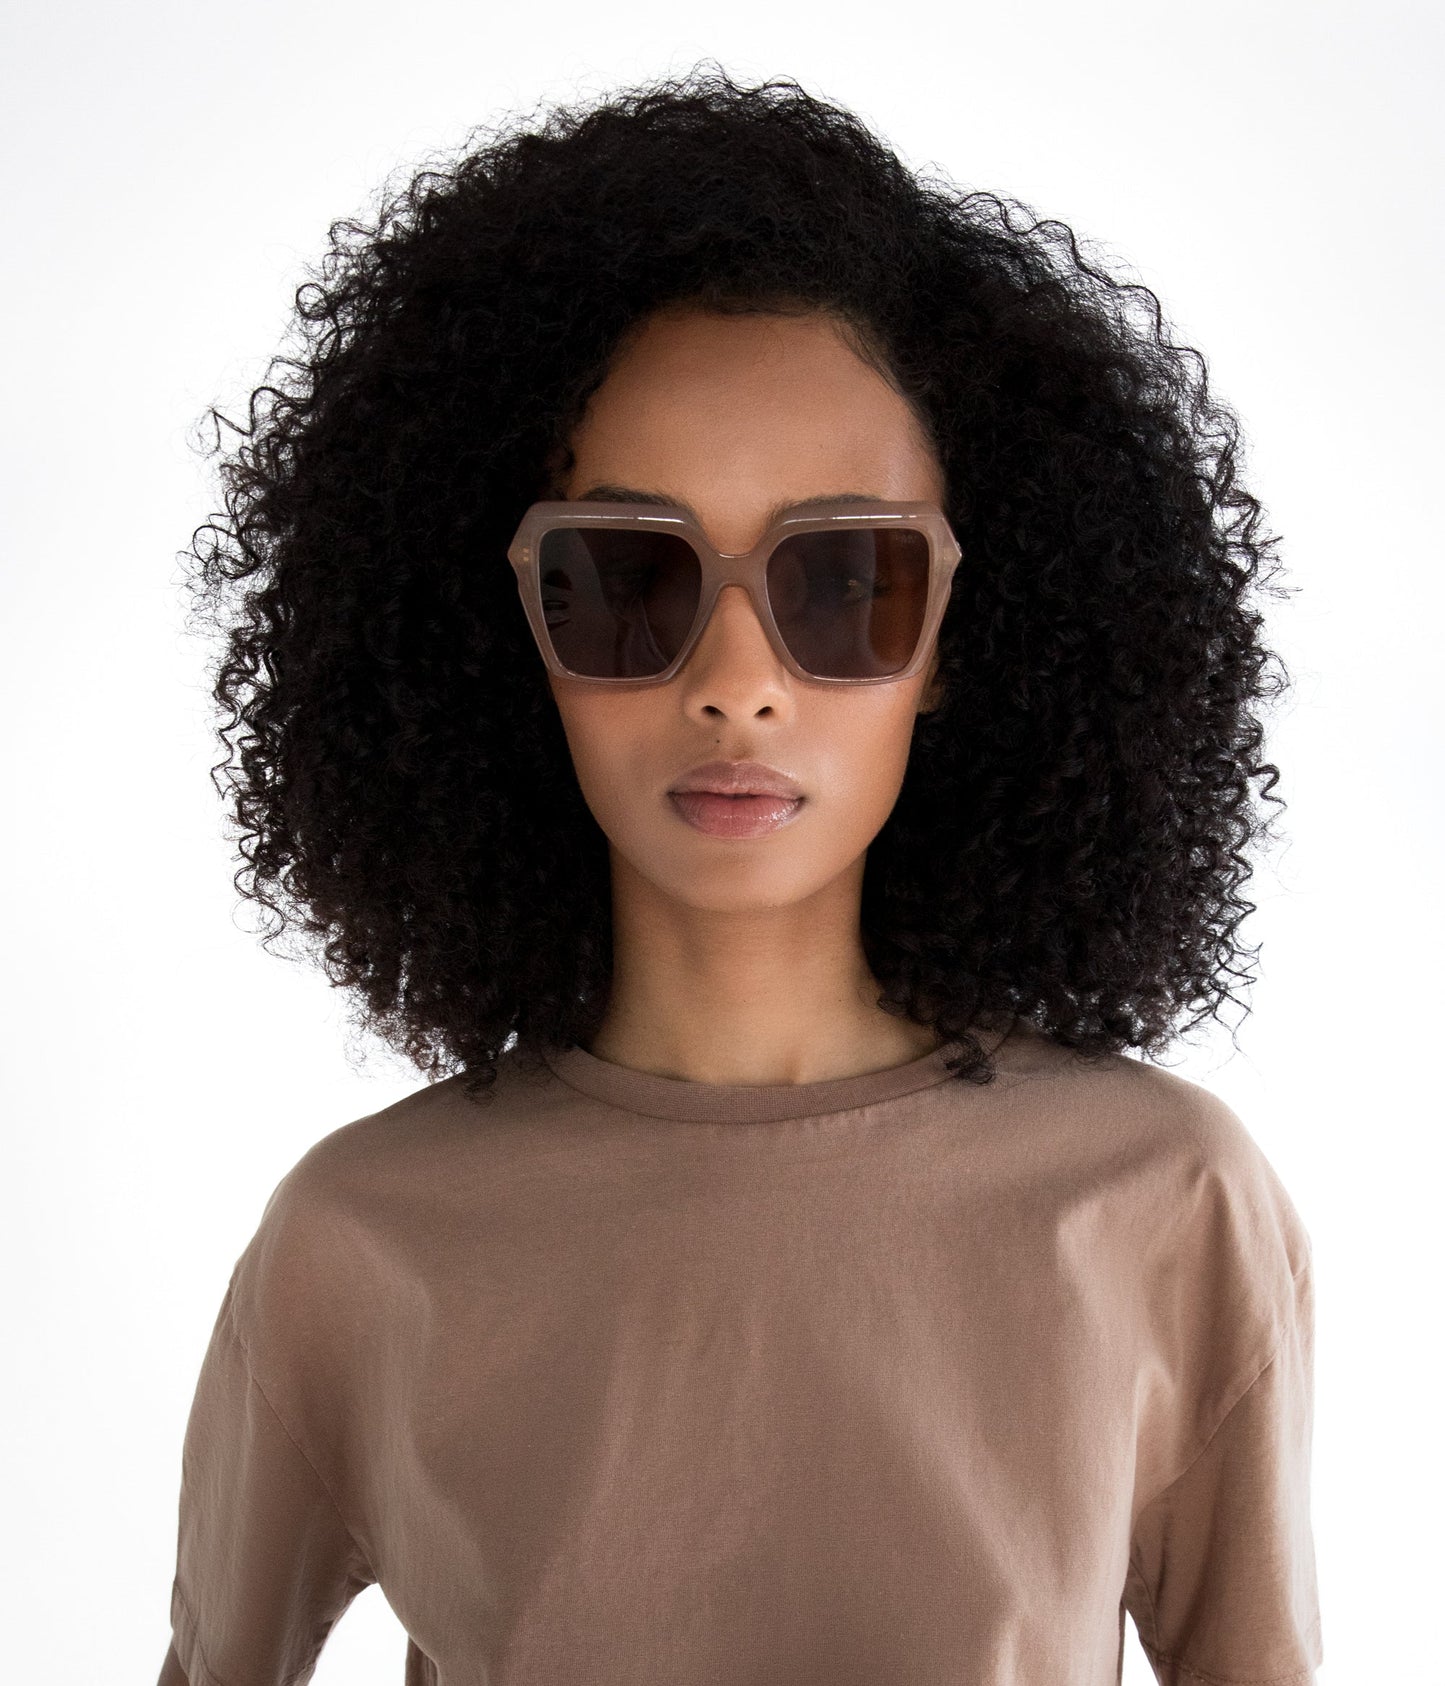 LOIS-2 Recycled Square Sunglasses | Color: White, Brown - variant::nude